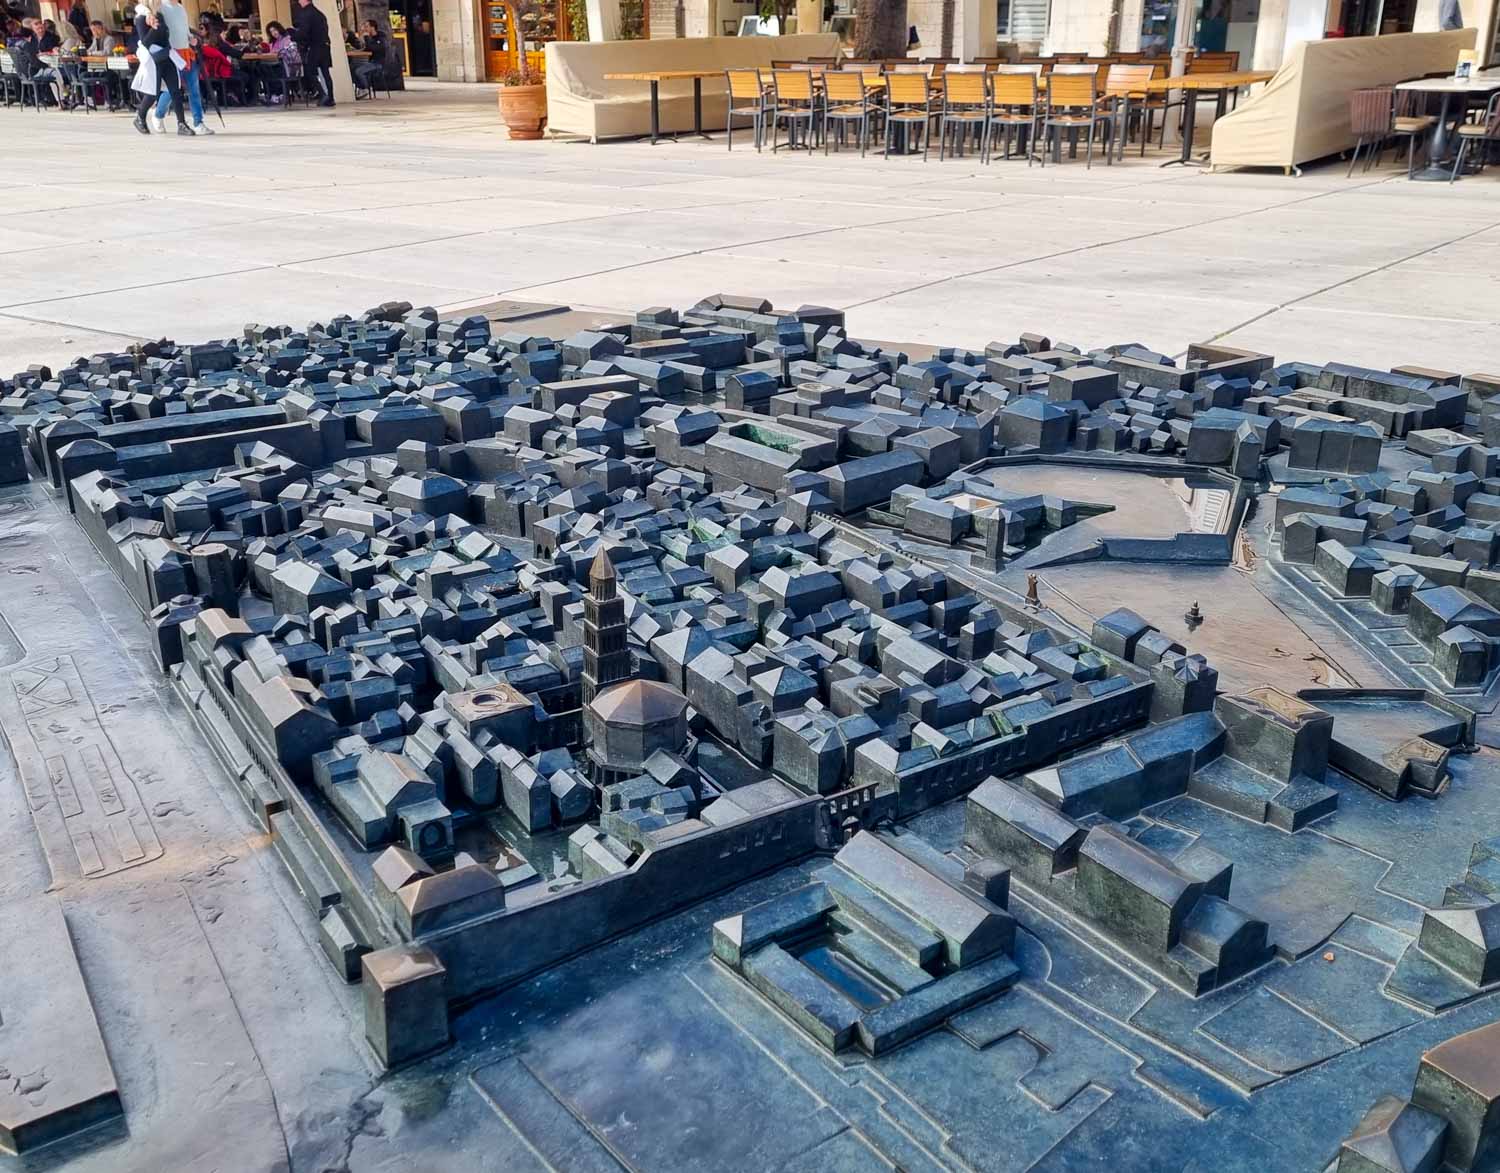 View of the bronze city model of Split on the Riva waterfront - a fun way to spot some of the Old Town landmarks if you're visiting Split with kids